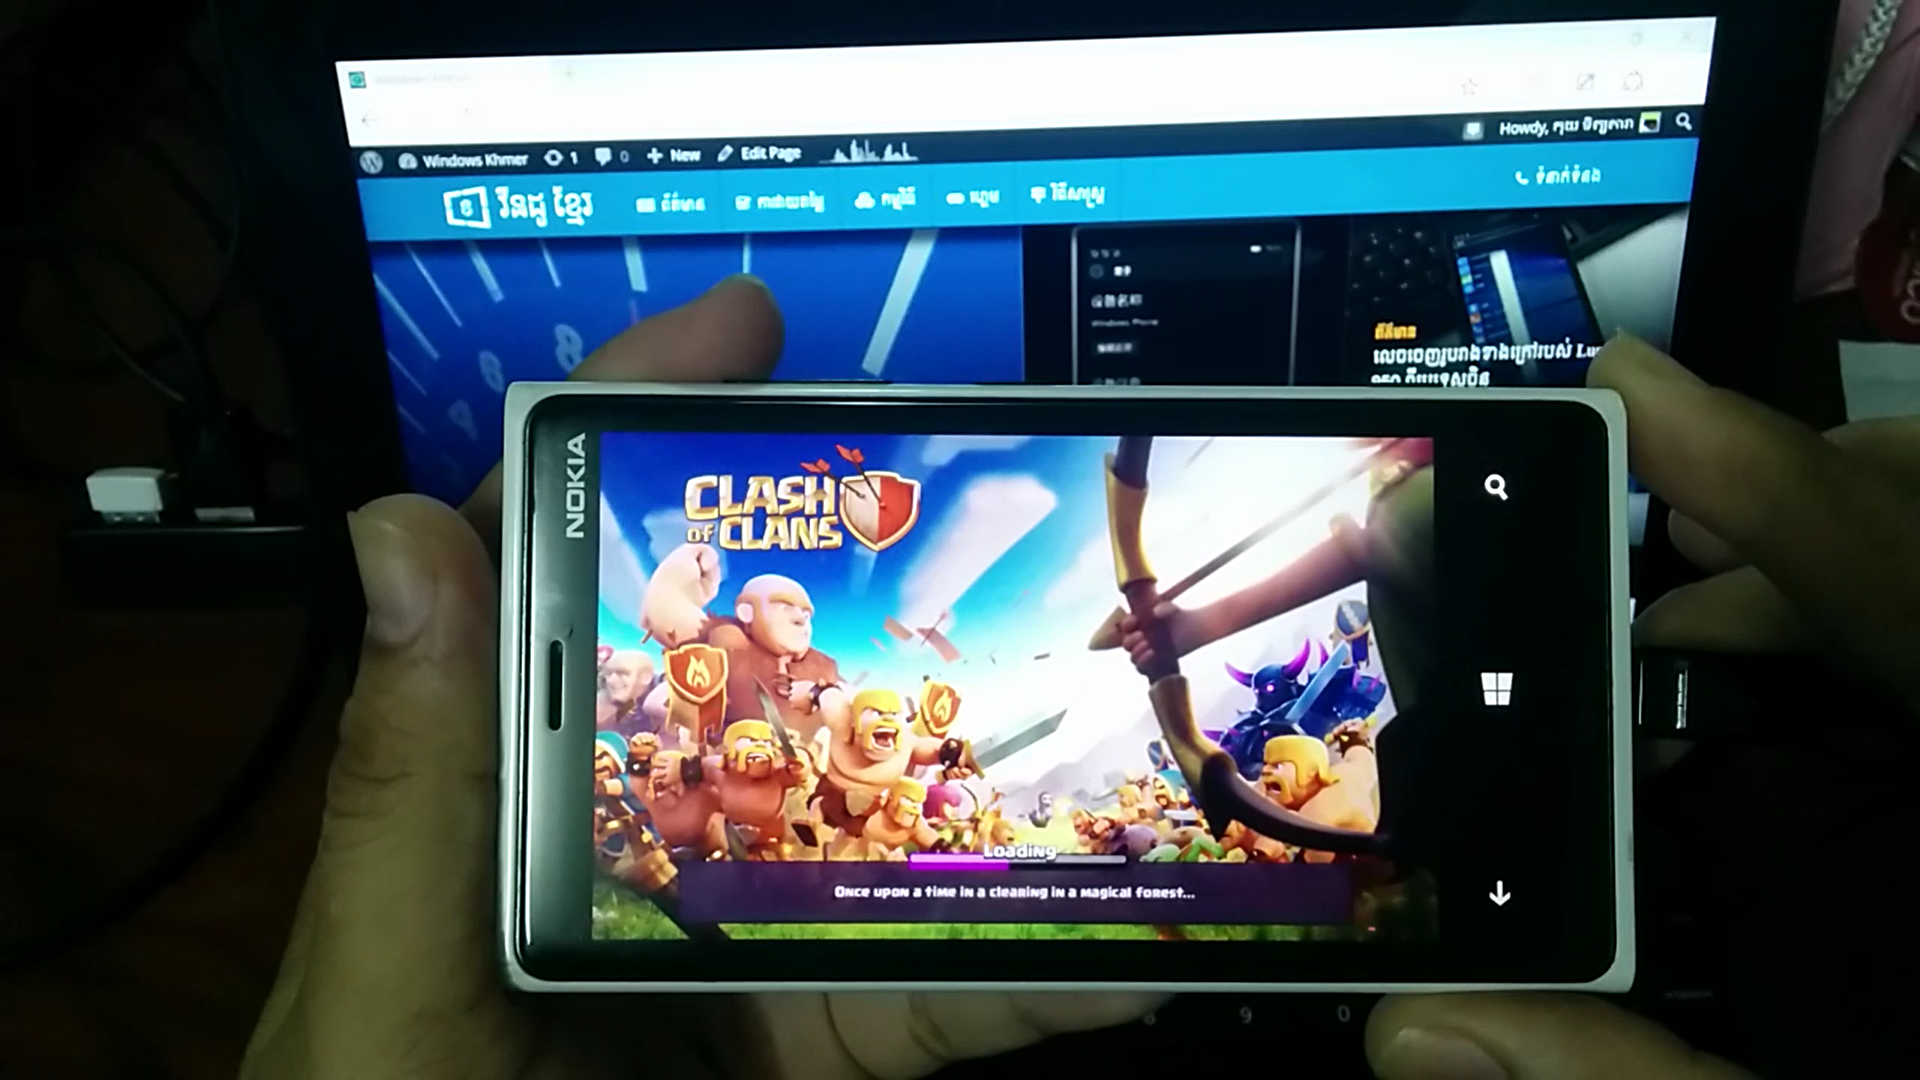 Clash of Clans Running on Windows 10 Mobile